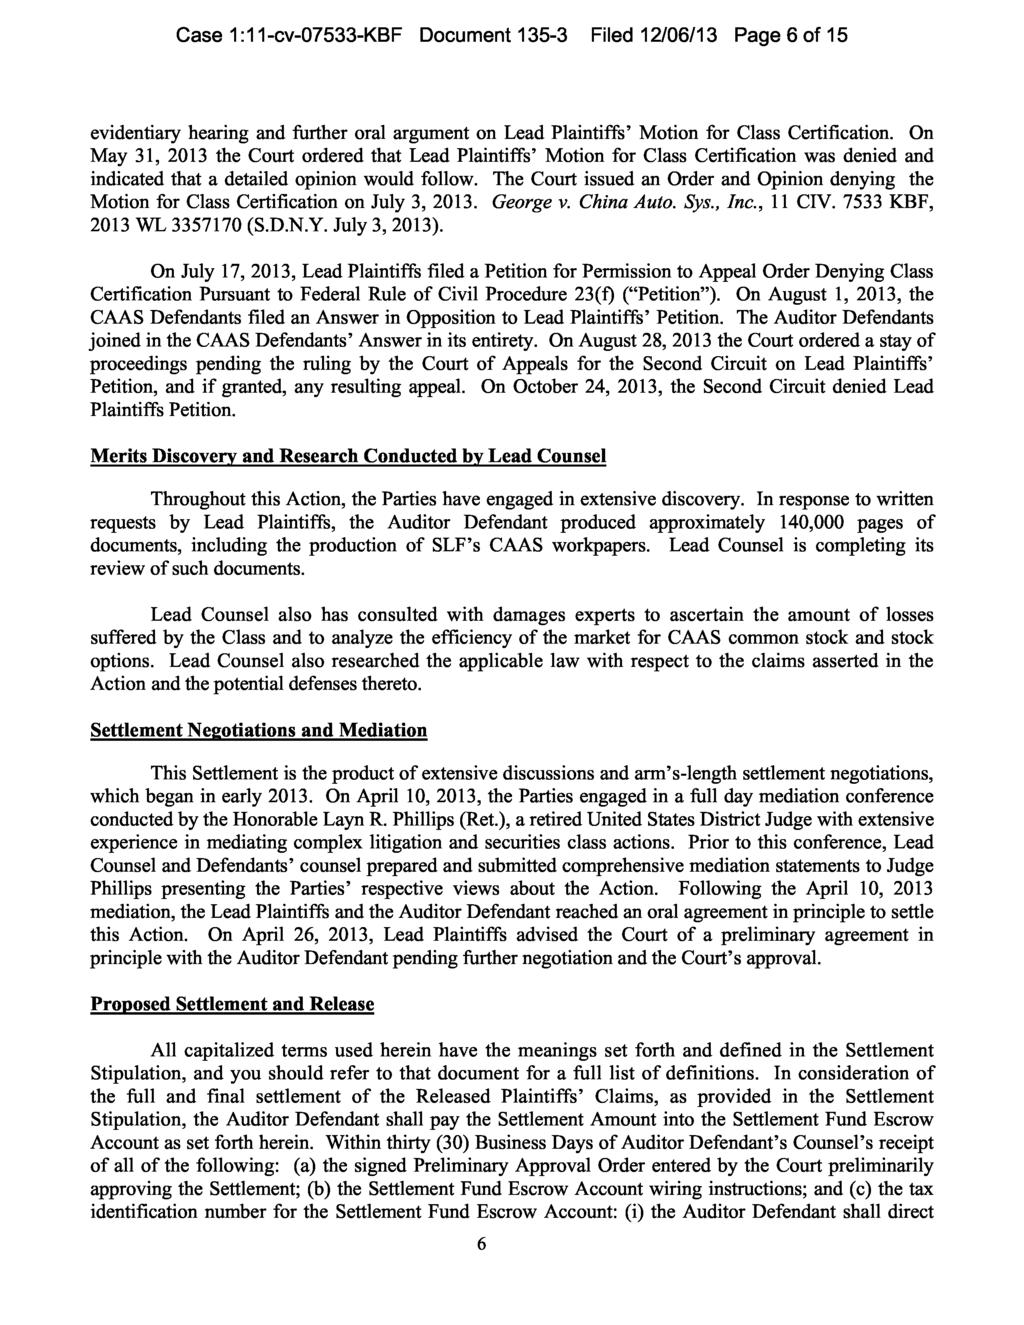 Case 1:11-cv-07533-KBF Document 135-3 Filed 12/06/13 Page 6 of 15 evidentiary hearing and further oral argument on Lead Plaintiffs Motion for Class Certification.